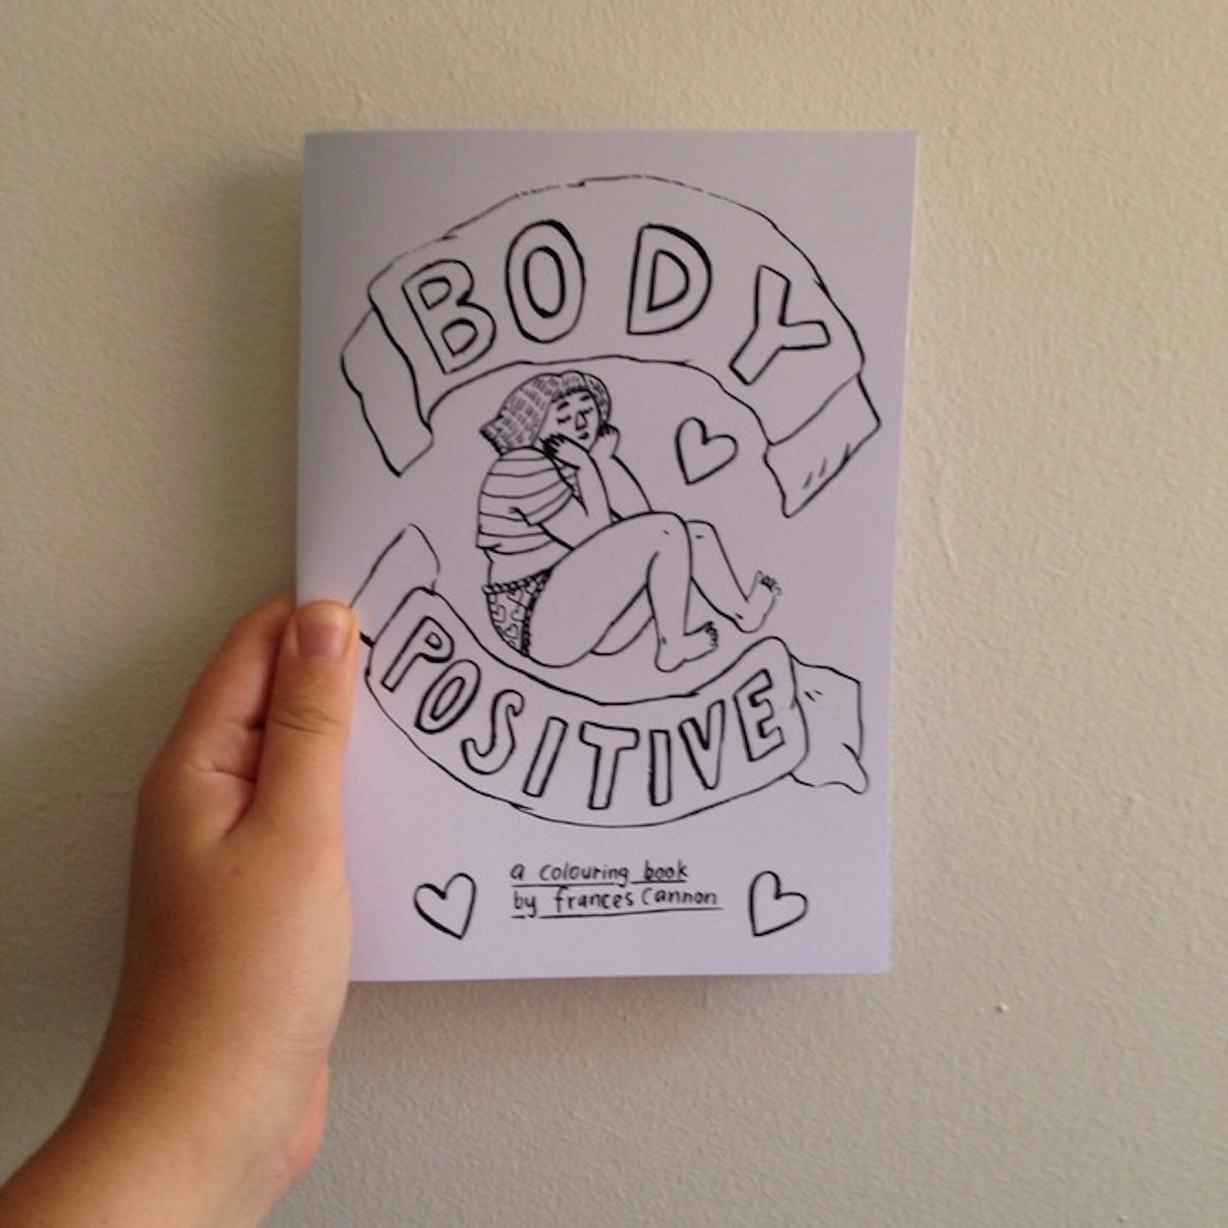 Frances Cannon S Body Positive Coloring Book Is The Next Step In Self Love Illustration — Photos